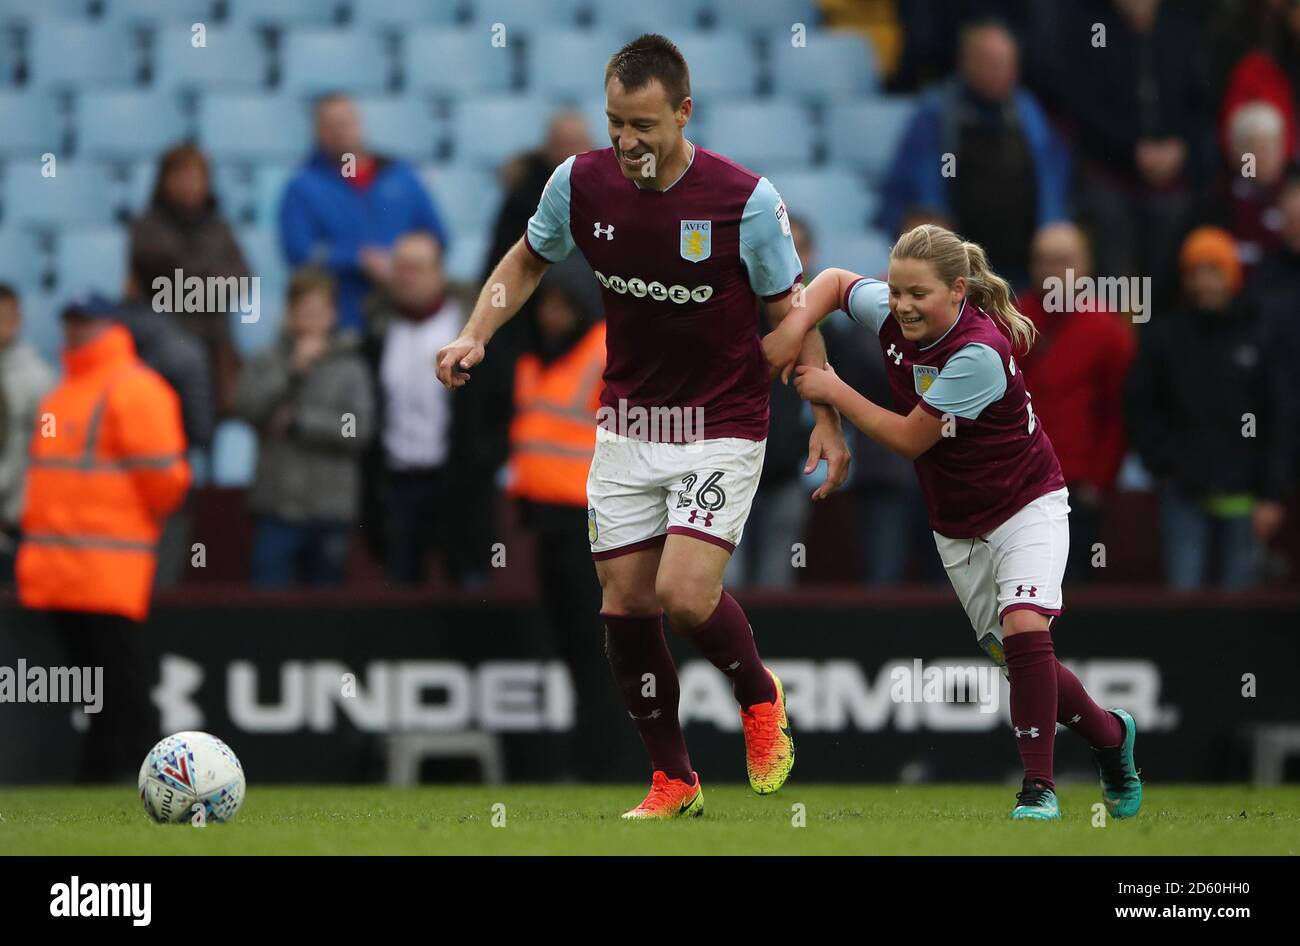 Aston Villa's John Terry plays football with his daughter Summer Rose Terry after the game against Derby County  Stock Photo